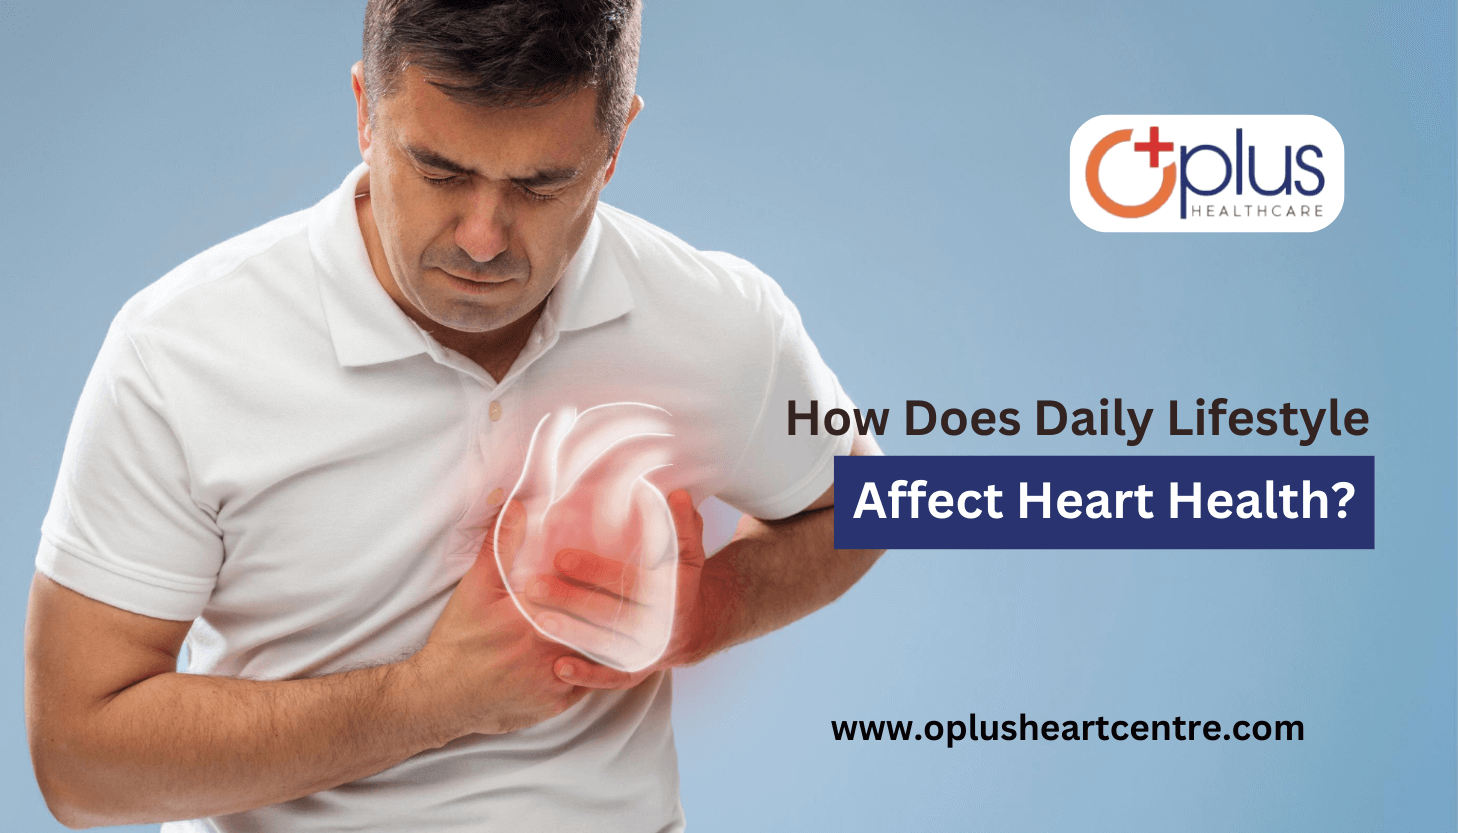 How Does Daily Lifestyle Affect Heart Health?